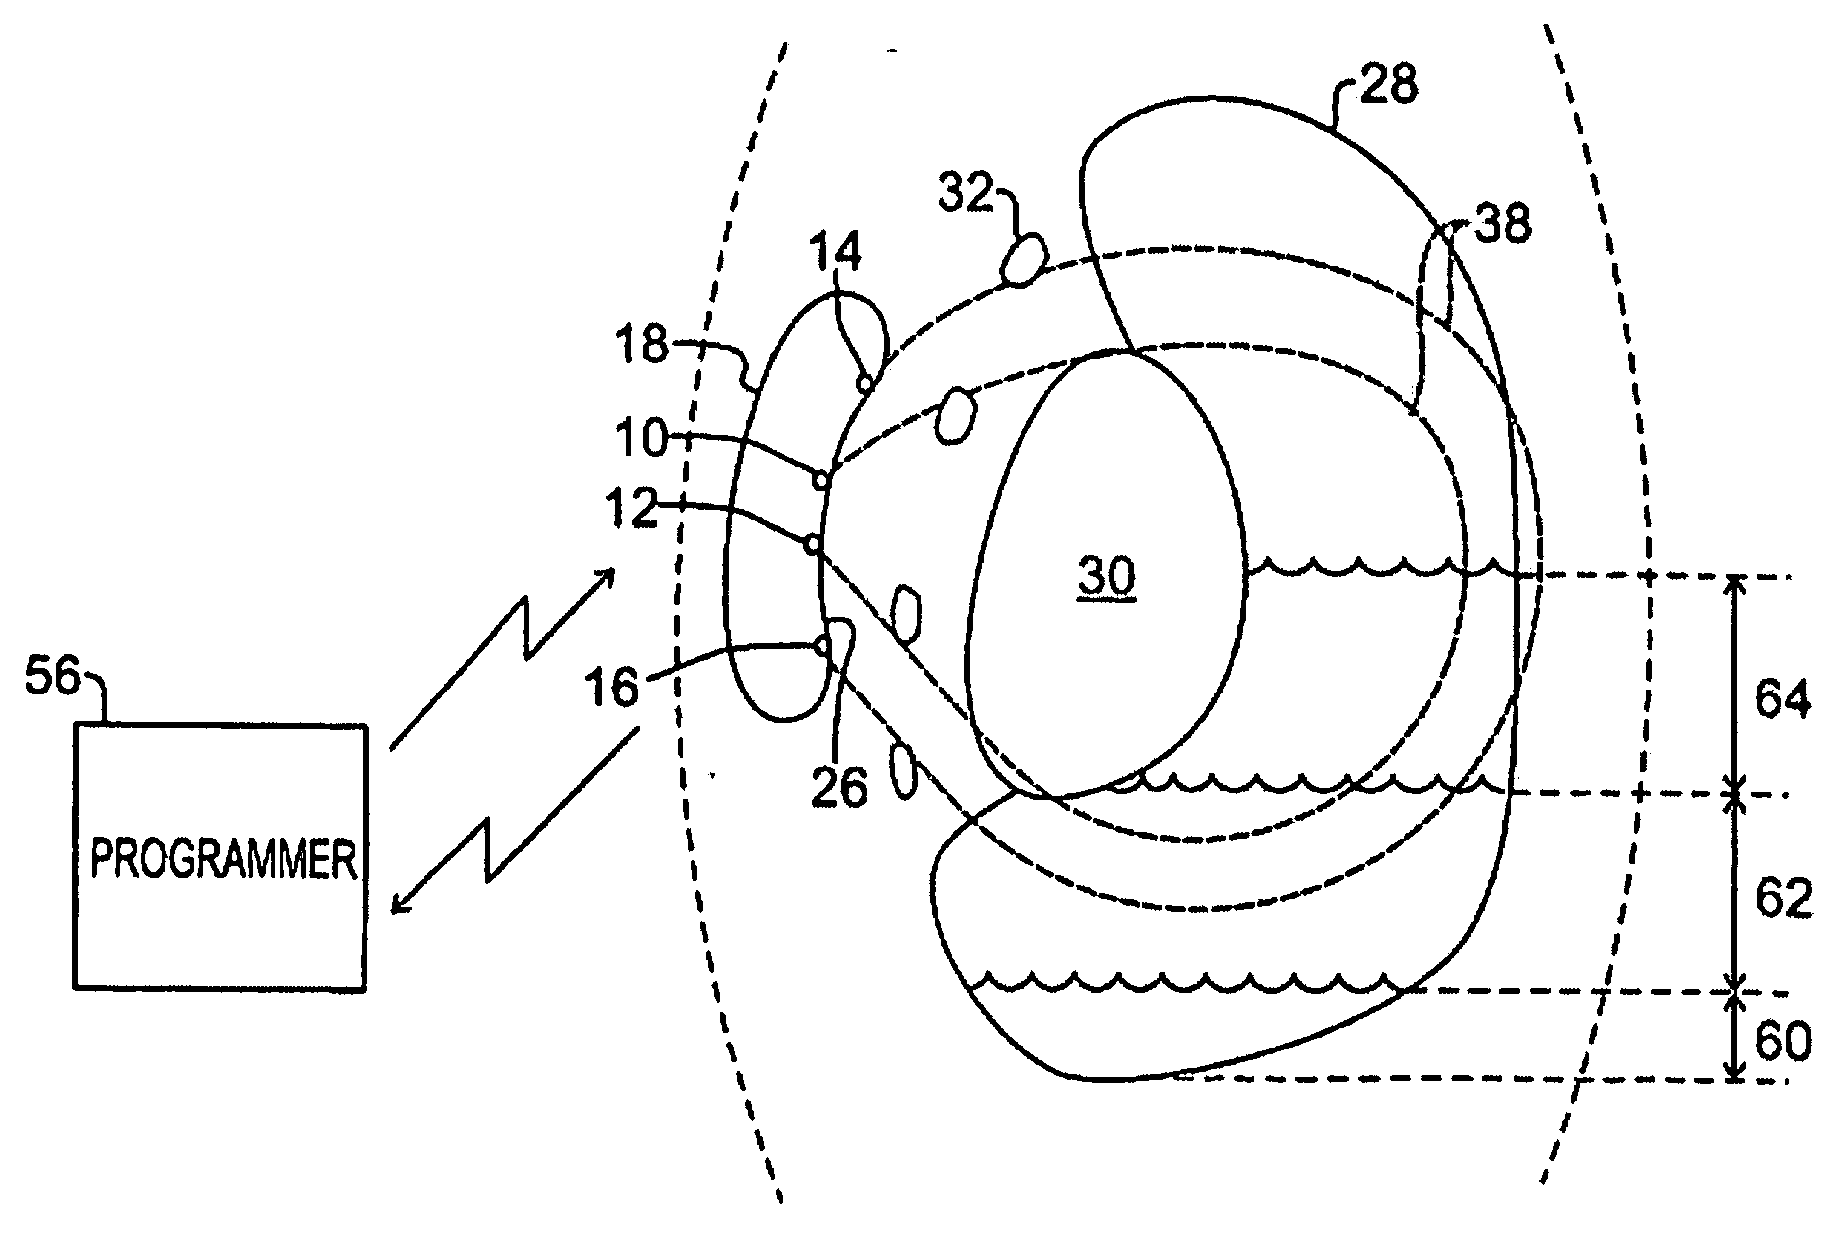 Remote Control of Implantable Device Through Medical Implant Communication Service Band